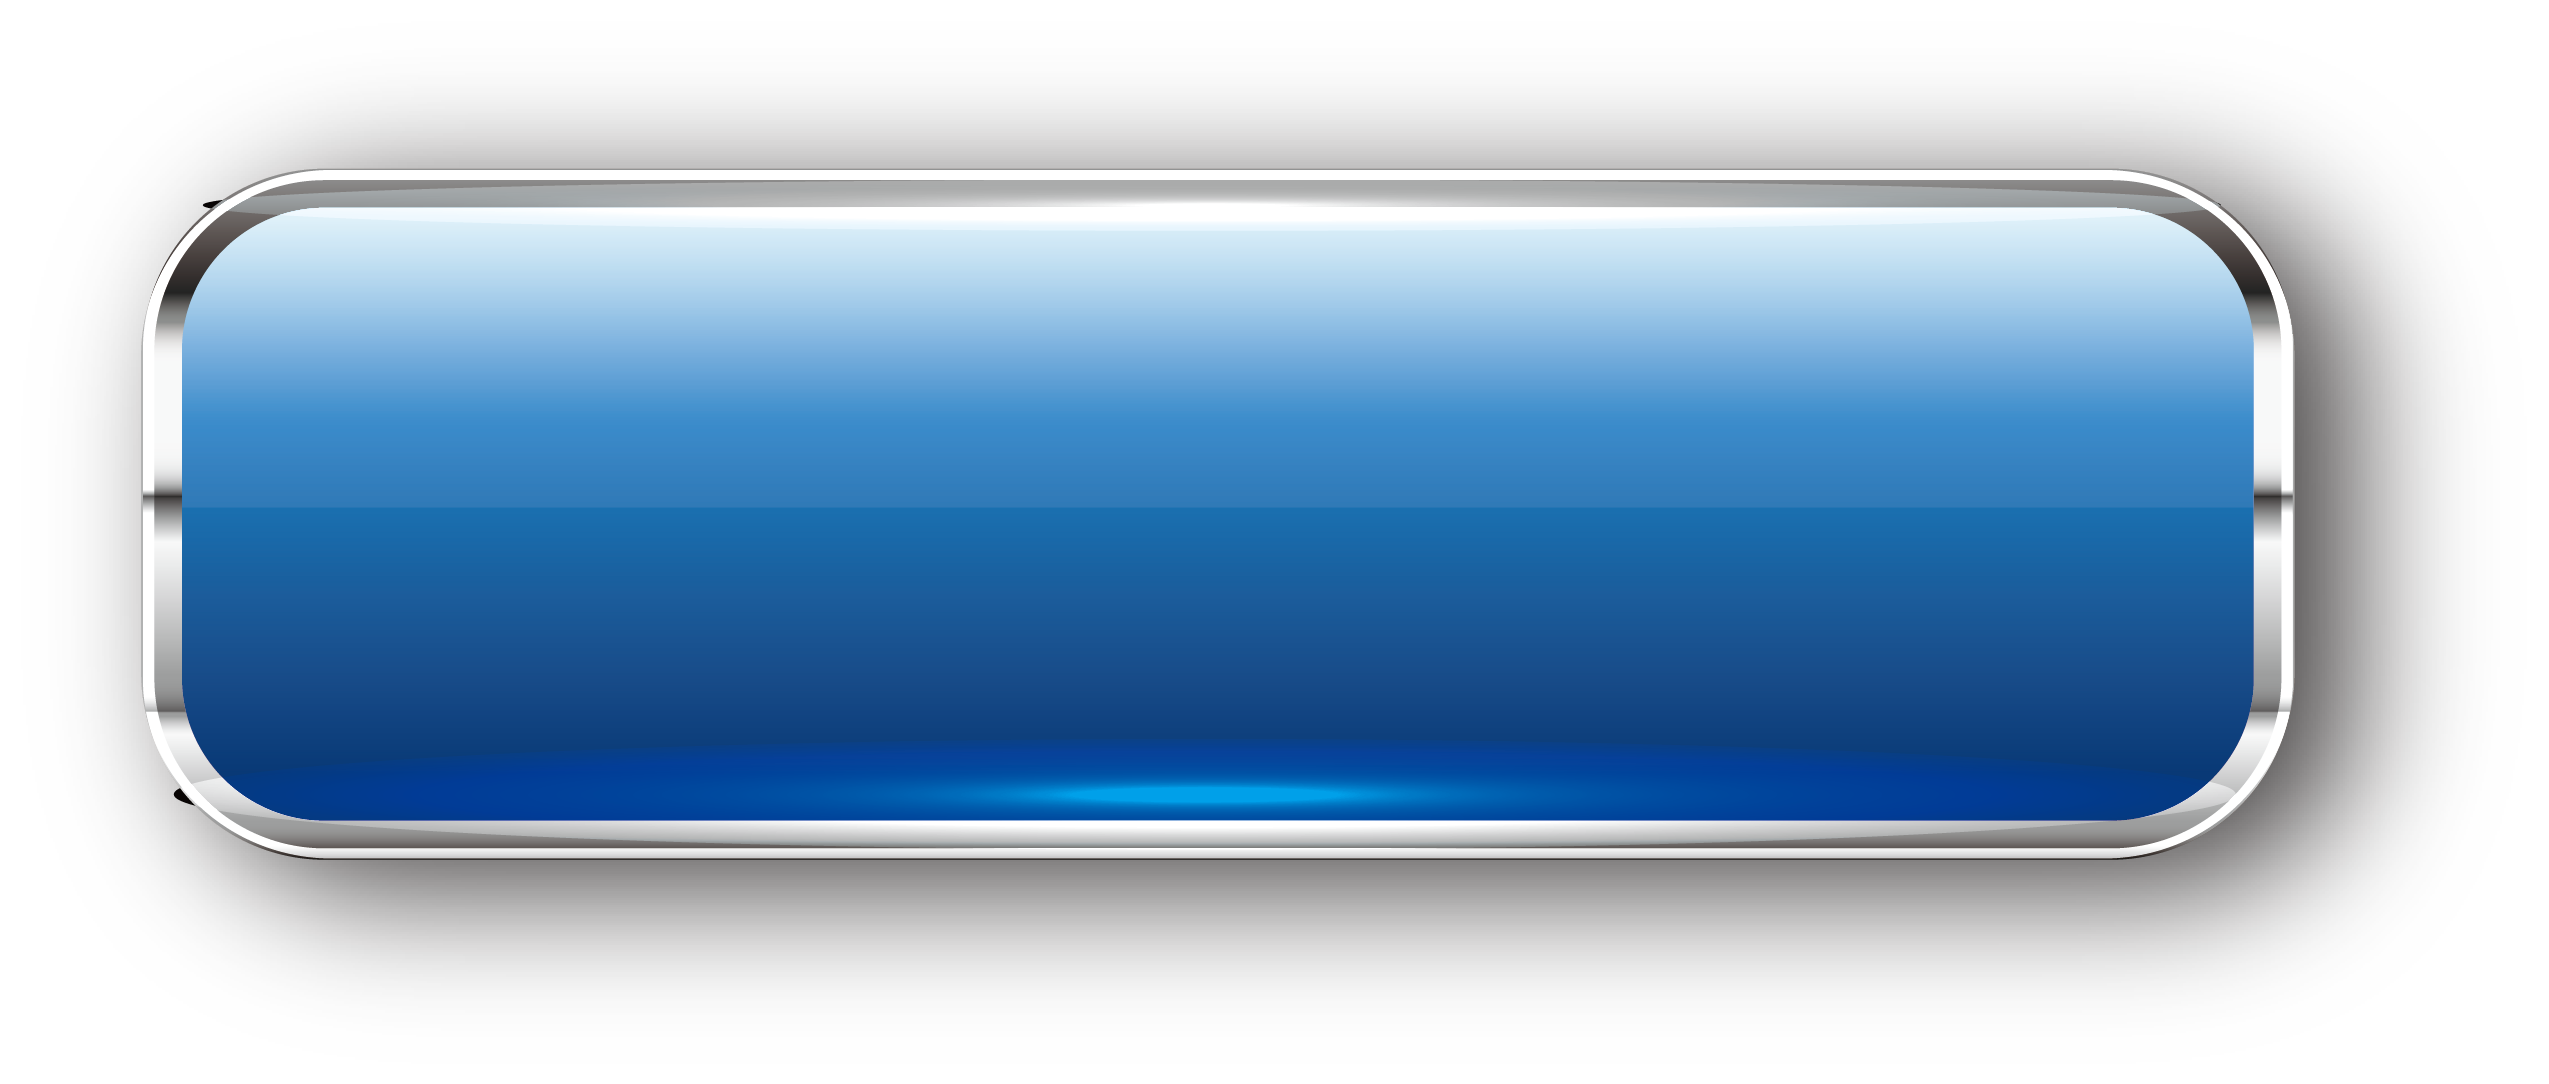 Blue Web Button Photos PNG Download Free PNG Image